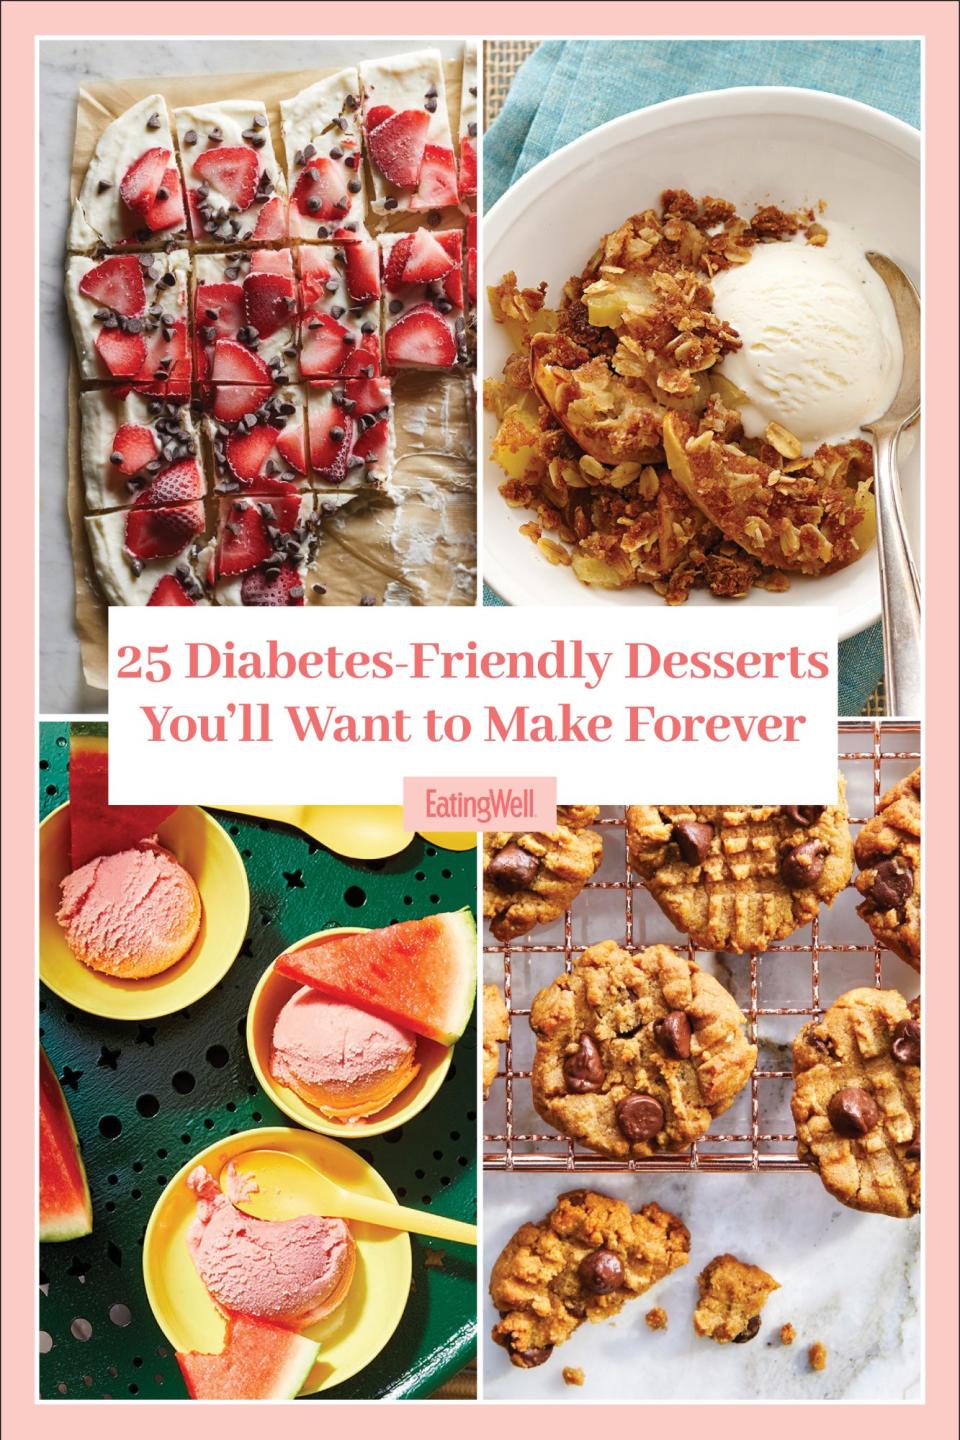 25 Diabetes-Friendly Desserts You'll Want to Make Forever